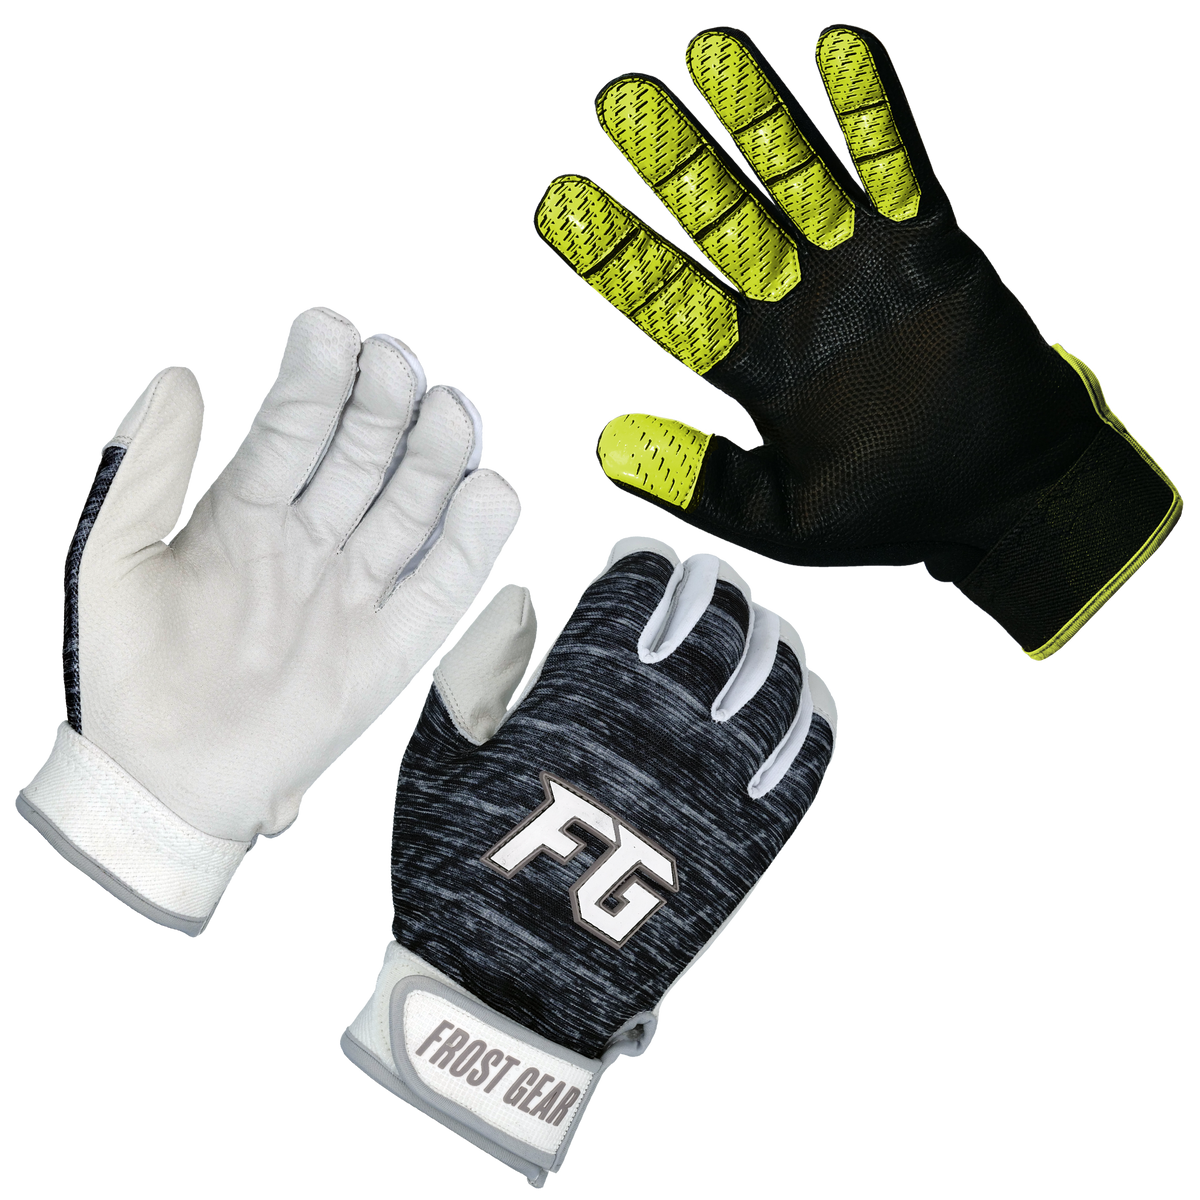 FG Package Deal: Softball Throwing Glove &amp; Pair of Batting Gloves